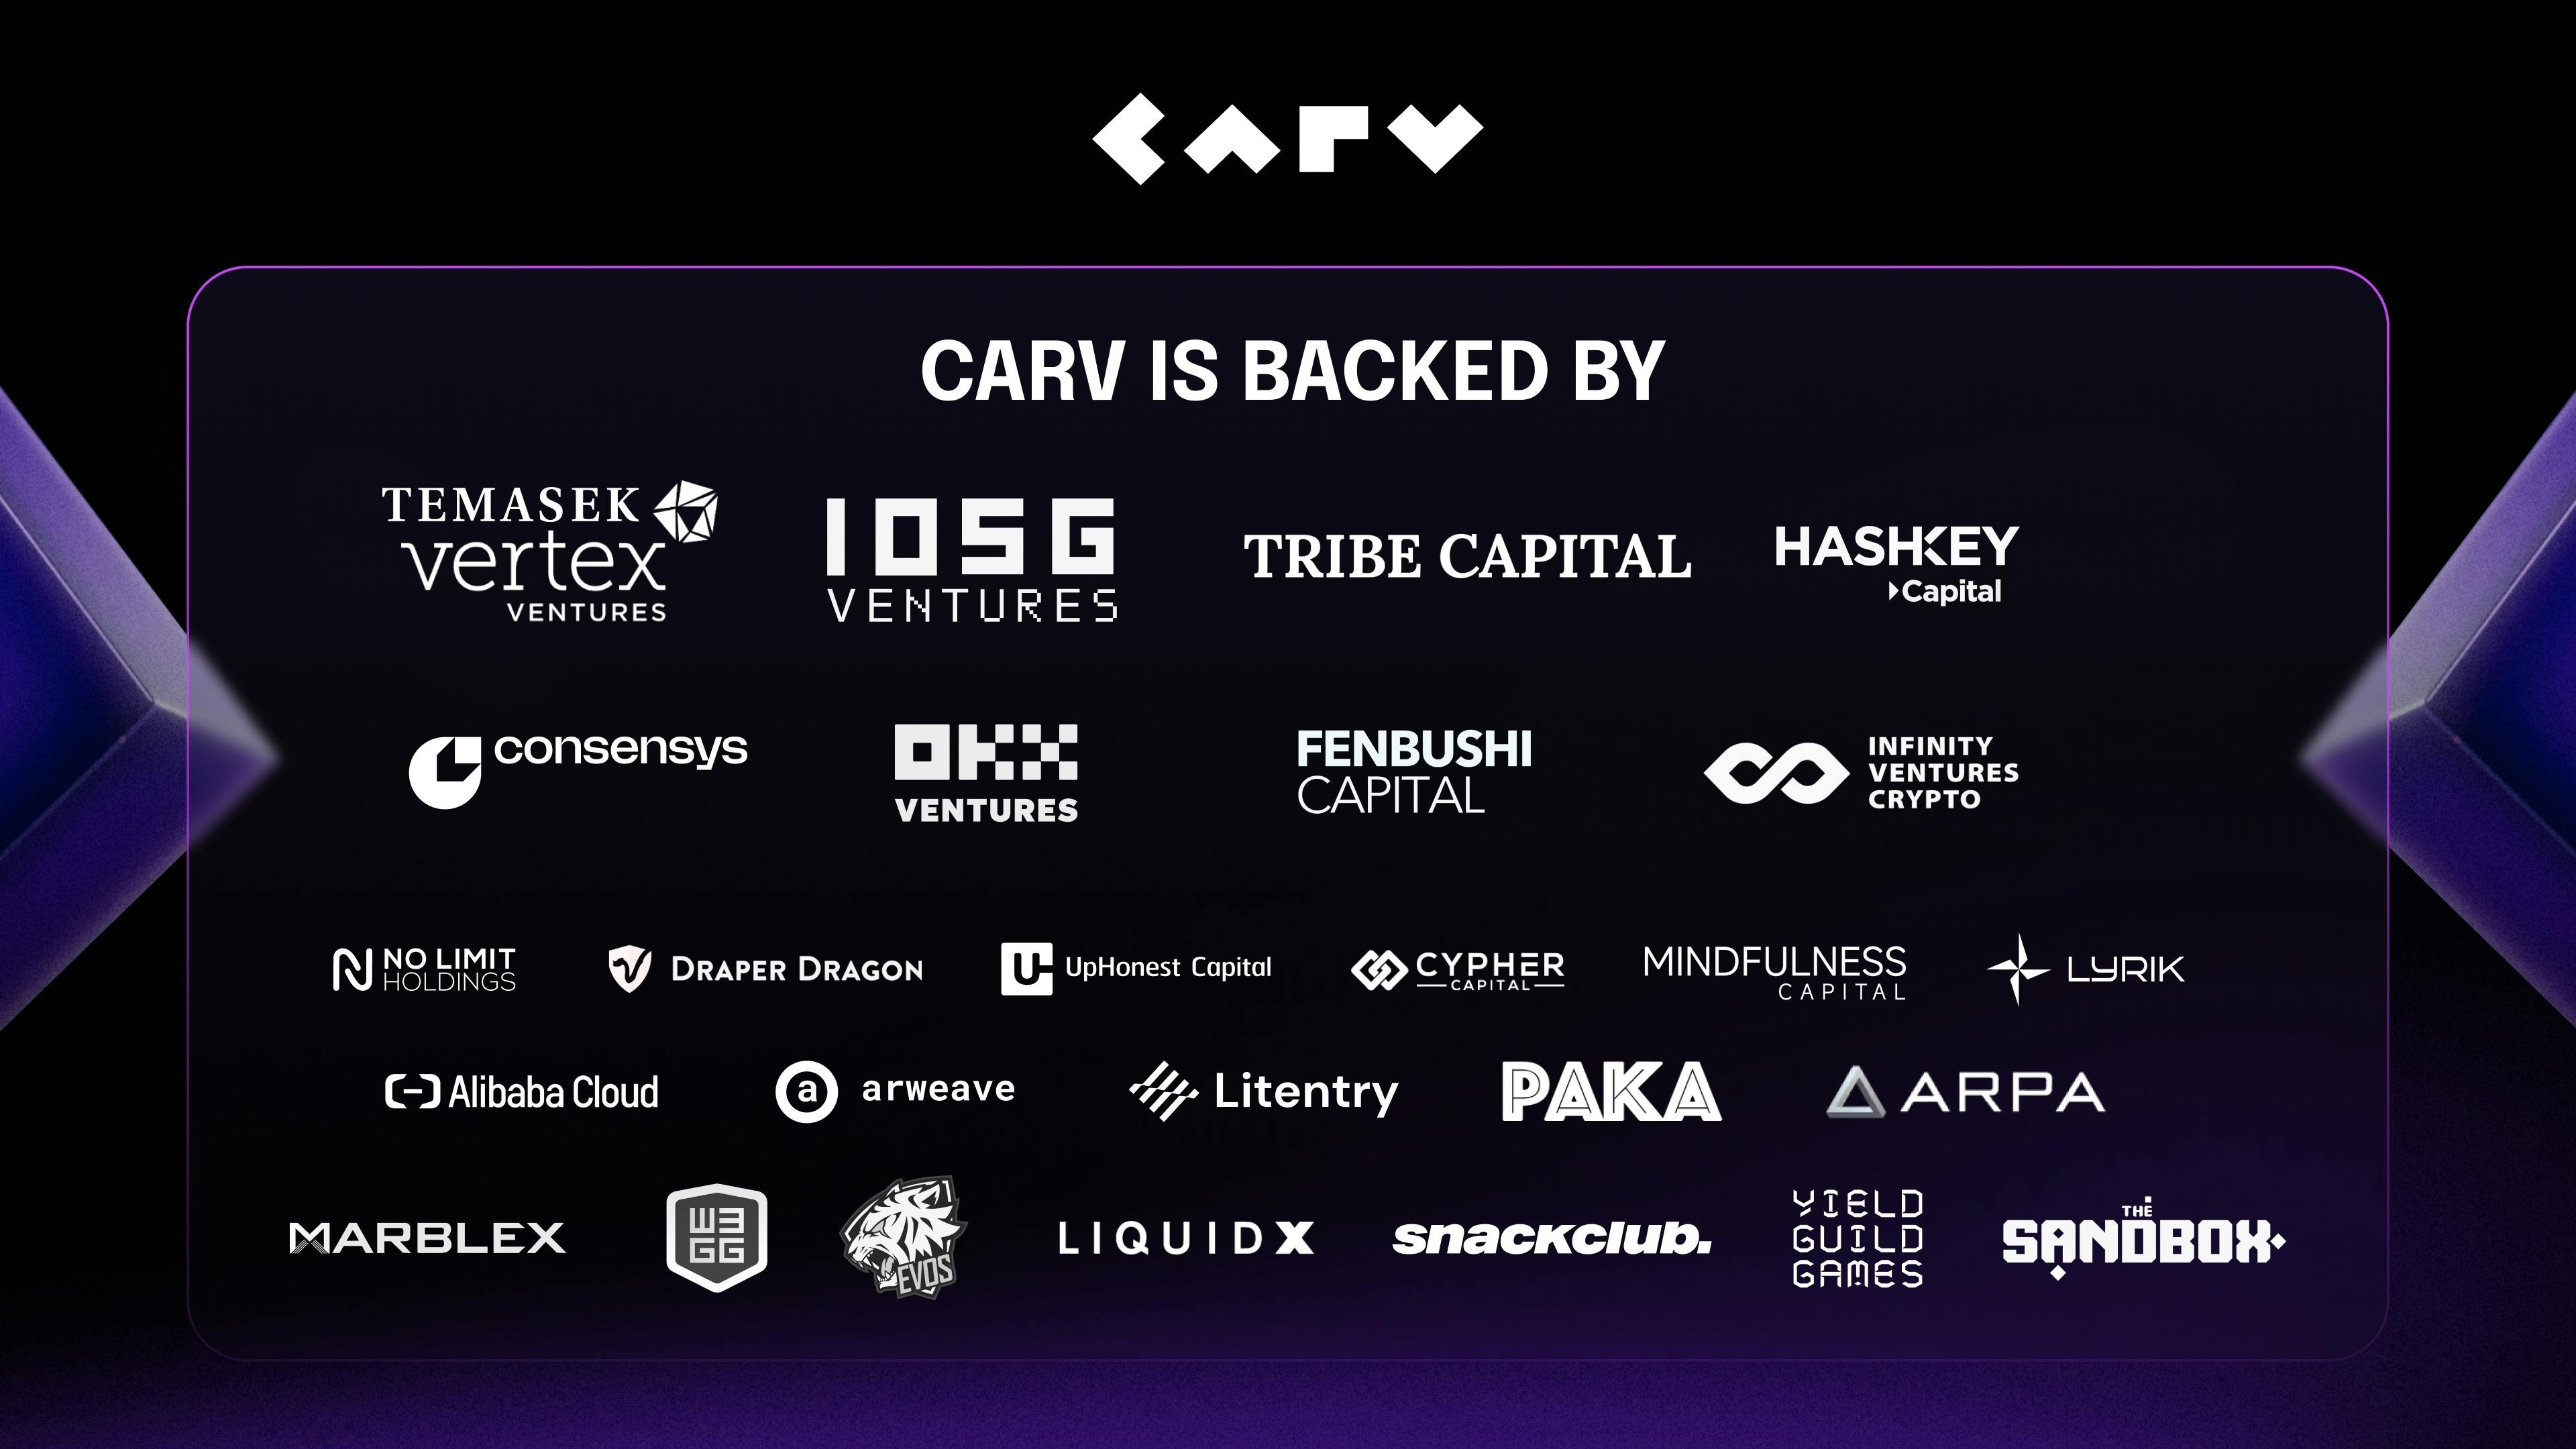 Carv investors and partners